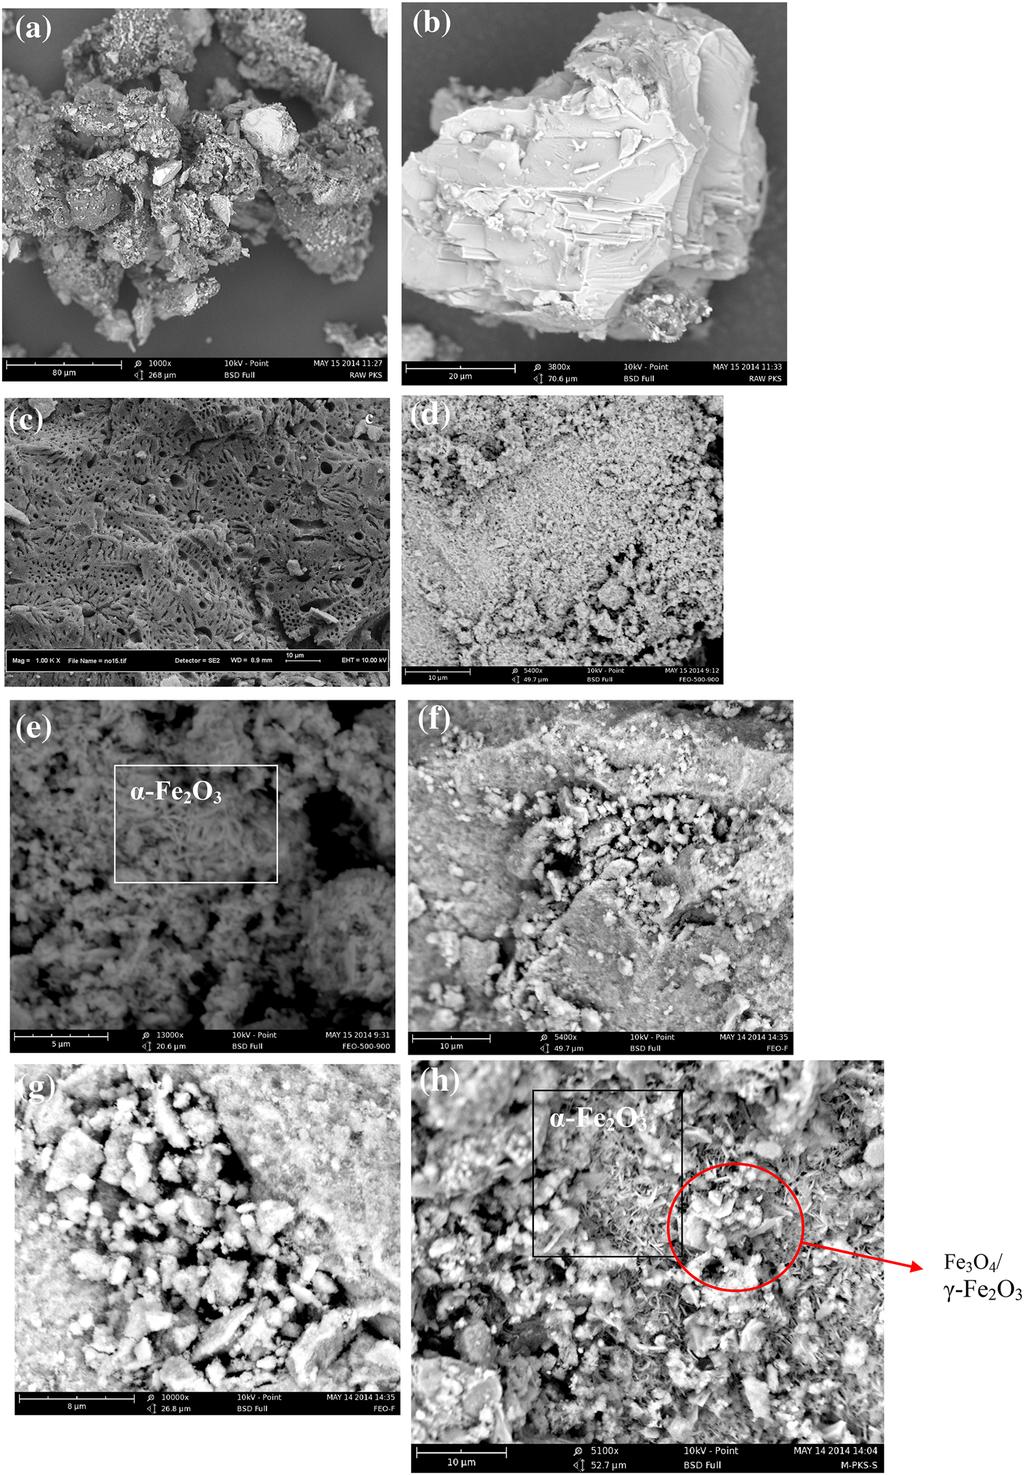 Nanotechnol. Environ. Eng. (2017) 2:16 Page 13 of 25 16 Fig. 6 Micrograph of raw PKS under magnification a 91000 and b 93800. c Micrograph of PKSAC at magnification of 91000.